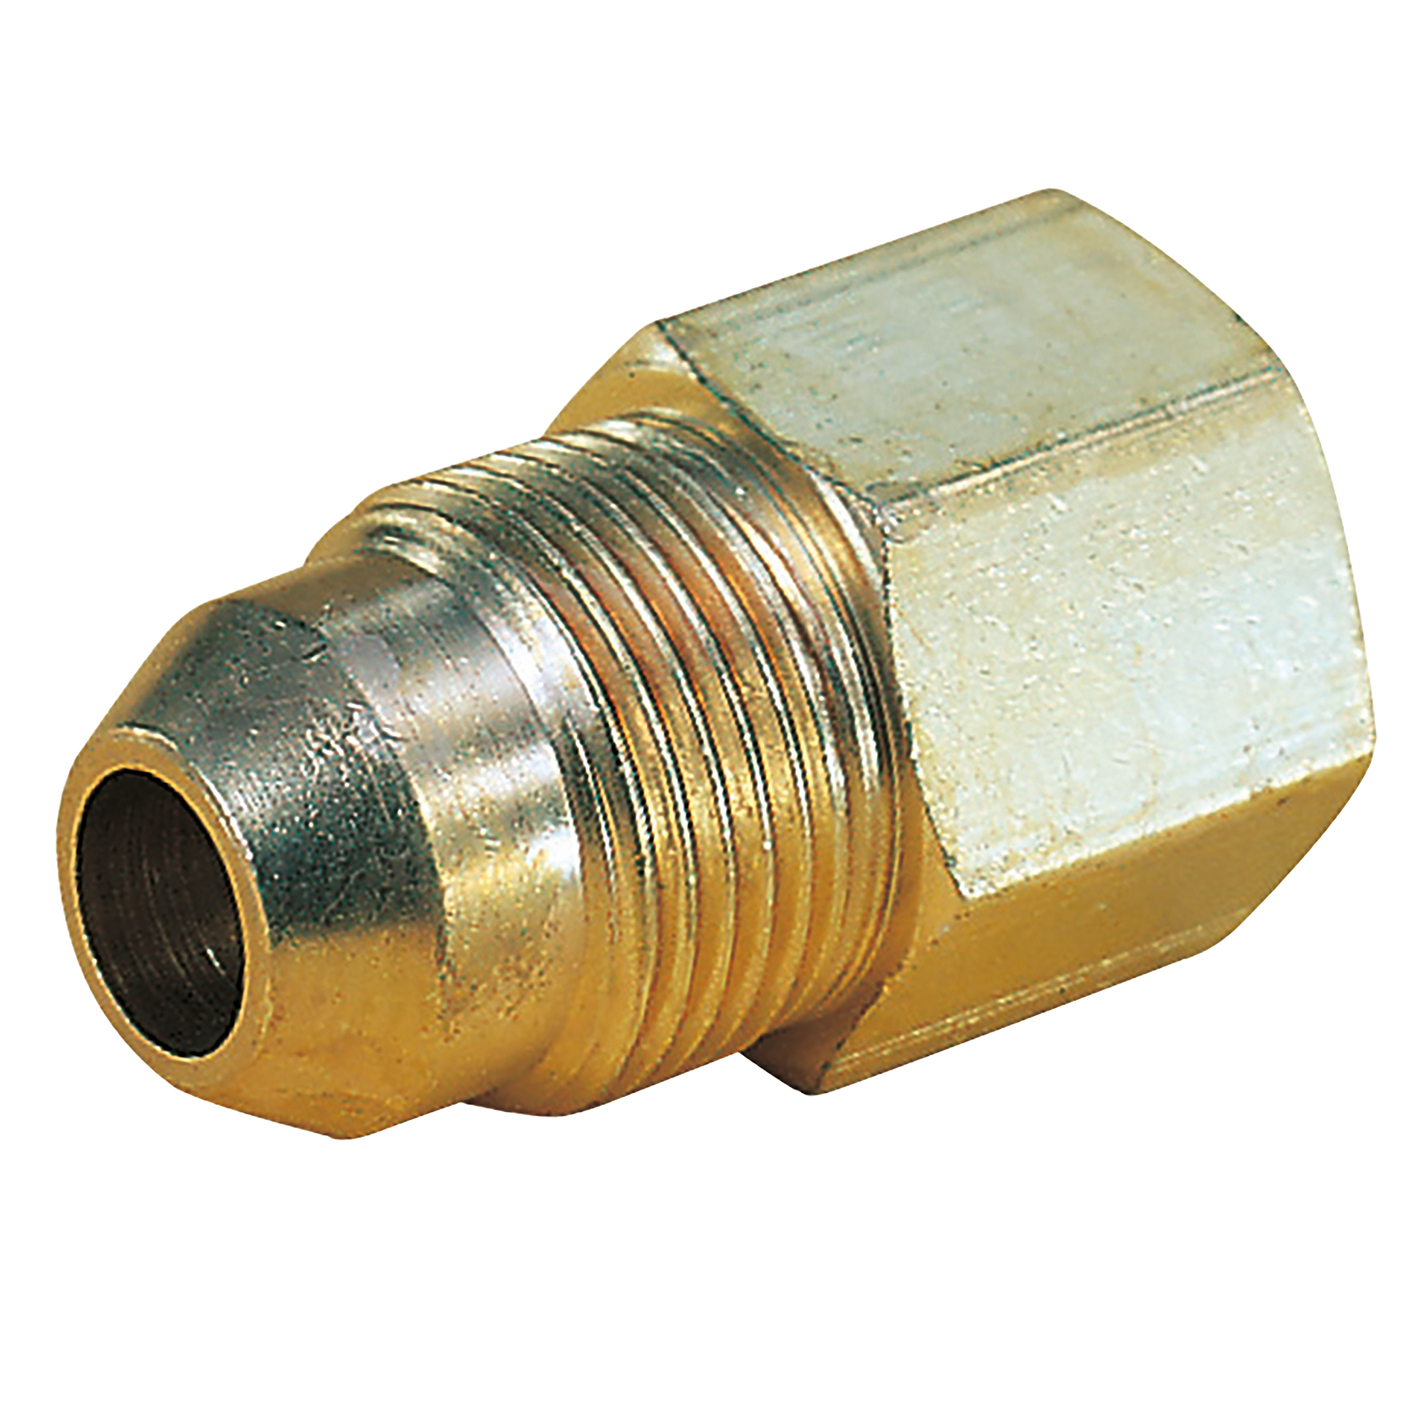 10 x 8mm OD Reducing Connector